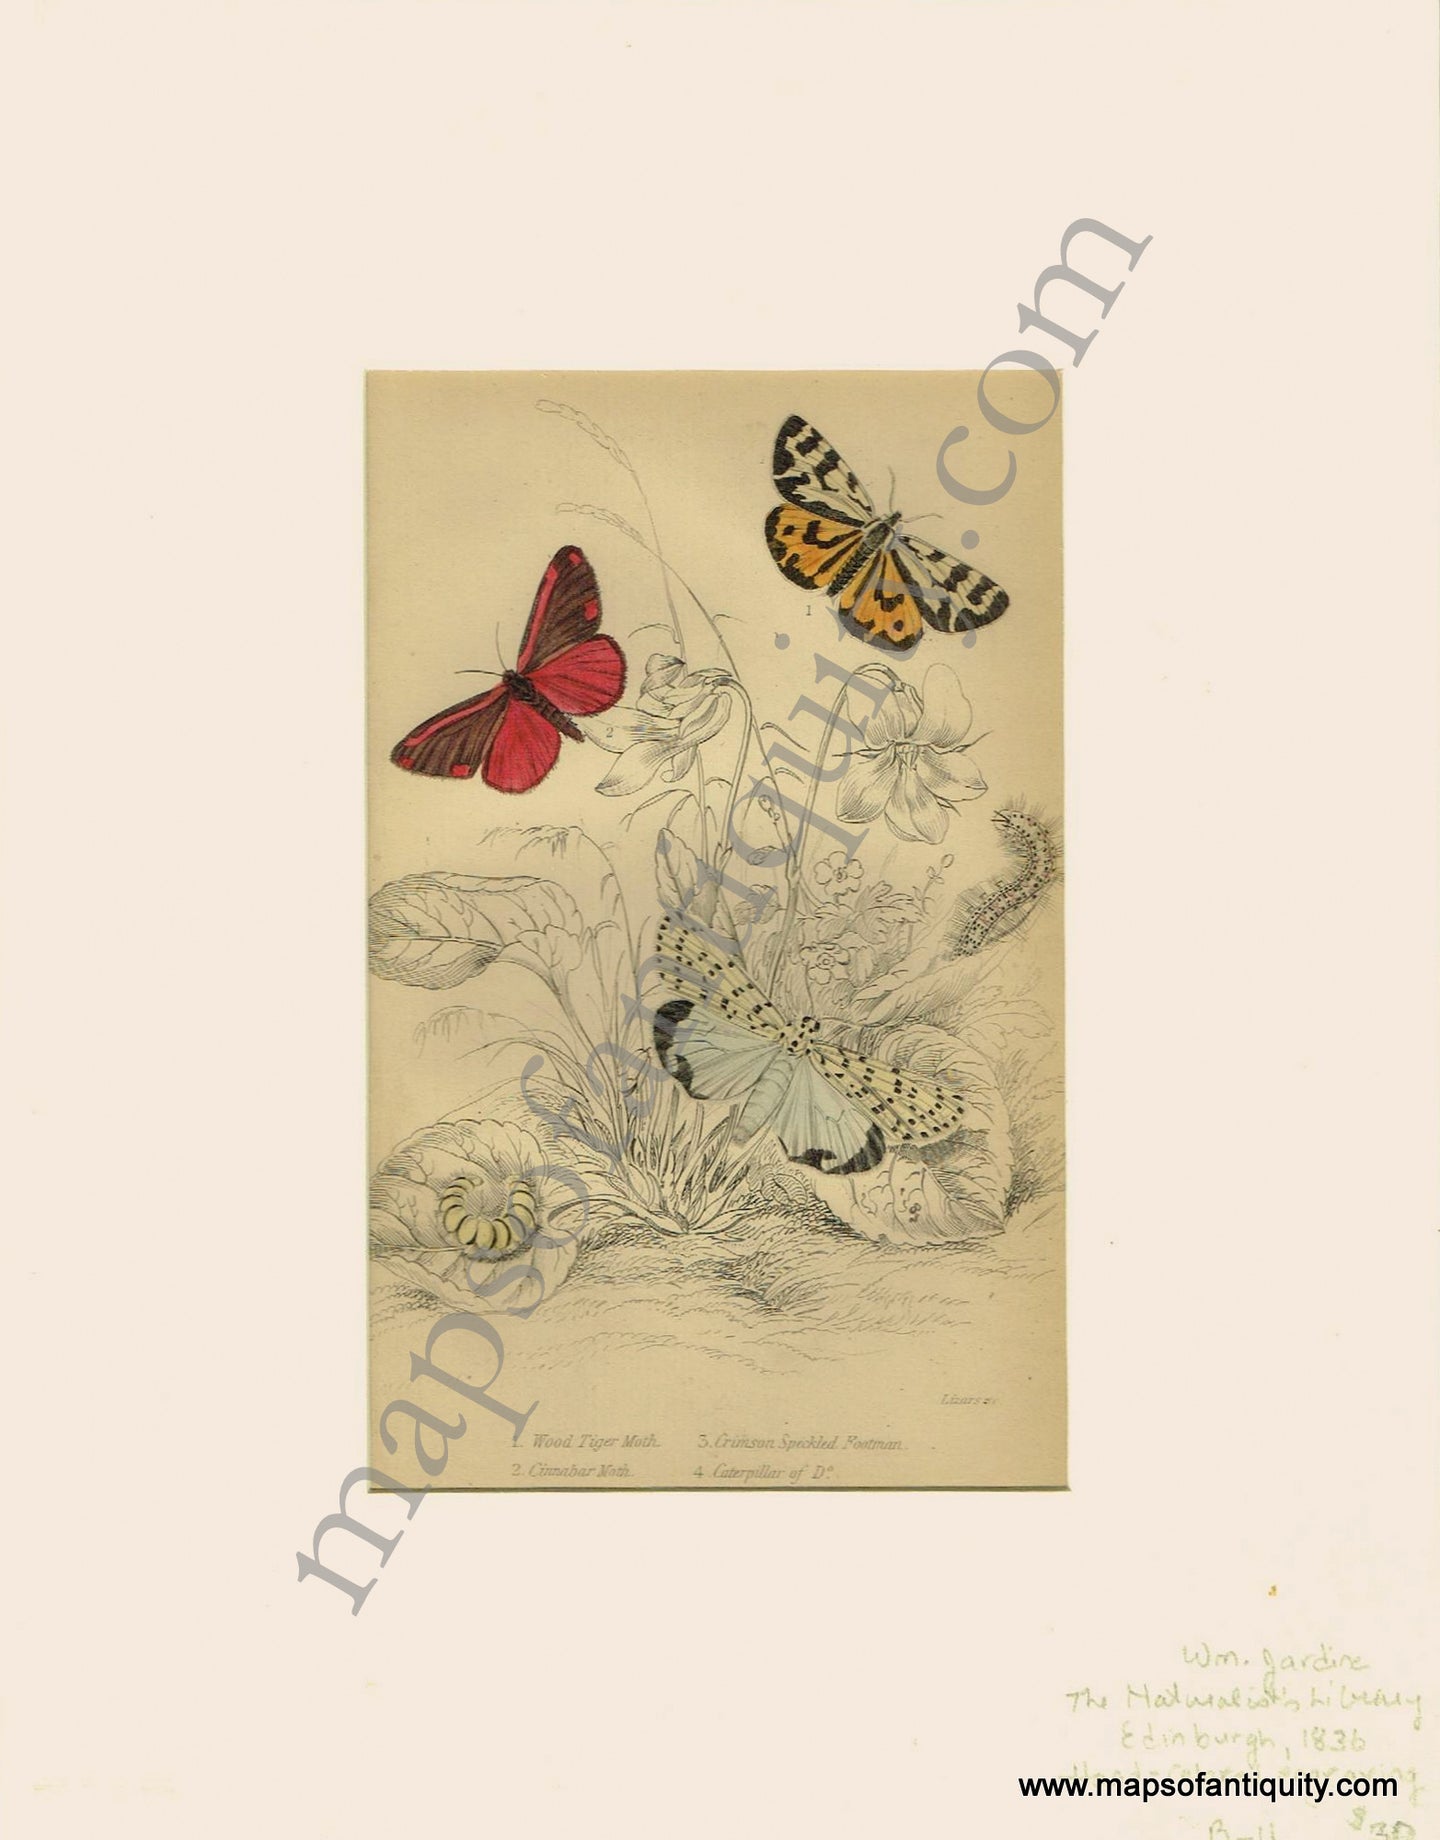 Antique-Print-Prints-Illustration-Illustrations-Engraved-Engraving-Engravings-Wood-Tiger-Moth-Crimson-Speckled-Footman-Cinnabar-Moth-Caterpillar-of-Do.-Moths-Butterfly-Butterflies-Insects-Bugs-Natural-History-Diagram-Diagrams-Naturalist's-Library-Jardine-1836-1830s-1800s-Early-Mid-19th-Century-Maps-of-Antiquity